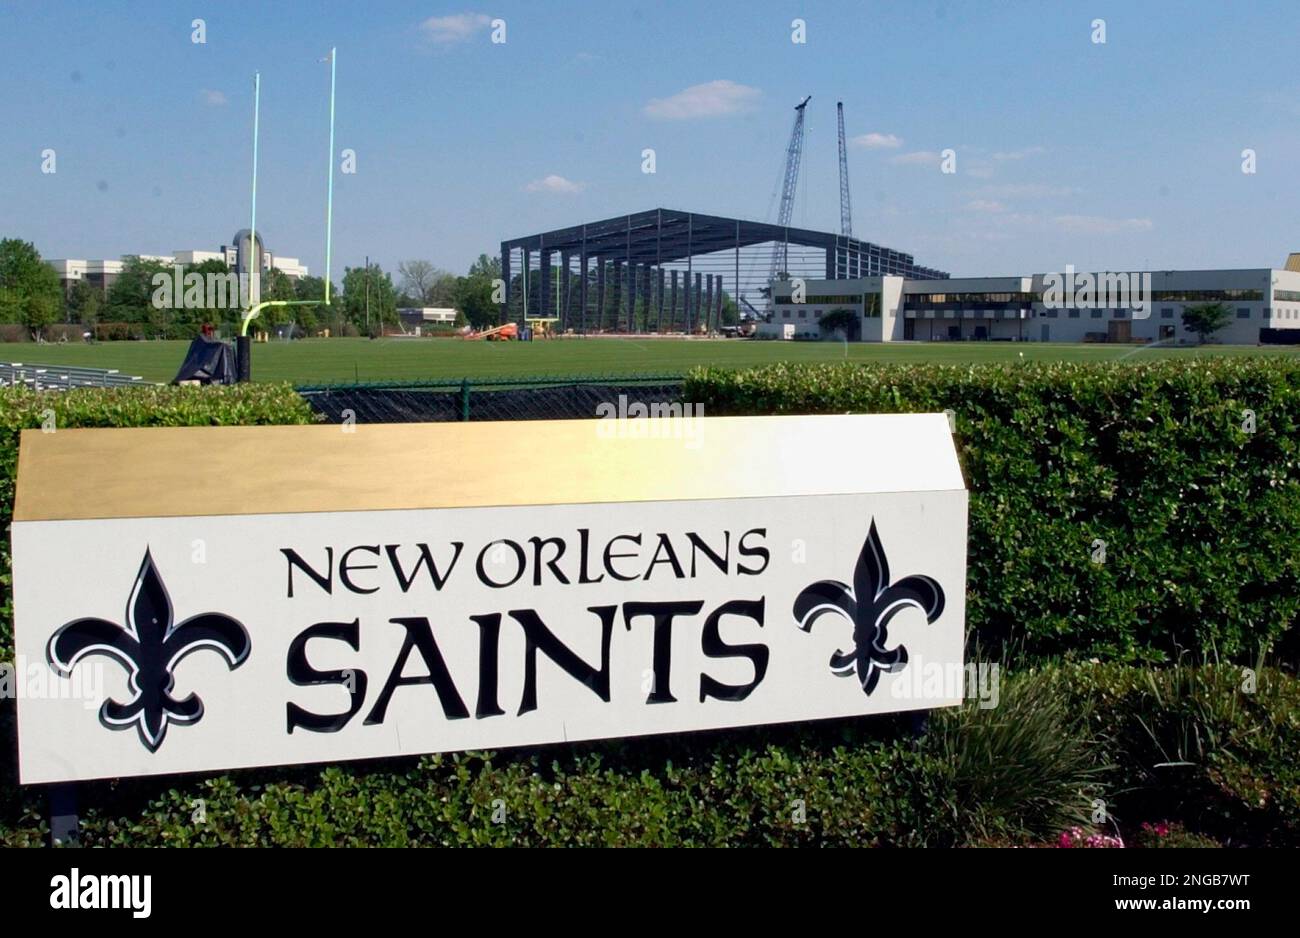 The indoor practice facility is beginning to take shape at the New Orleans  Saints training facility in Metairie, La., as seen Tuesday, April 15, 2003.  Saints general manager Mickey Loomis said the